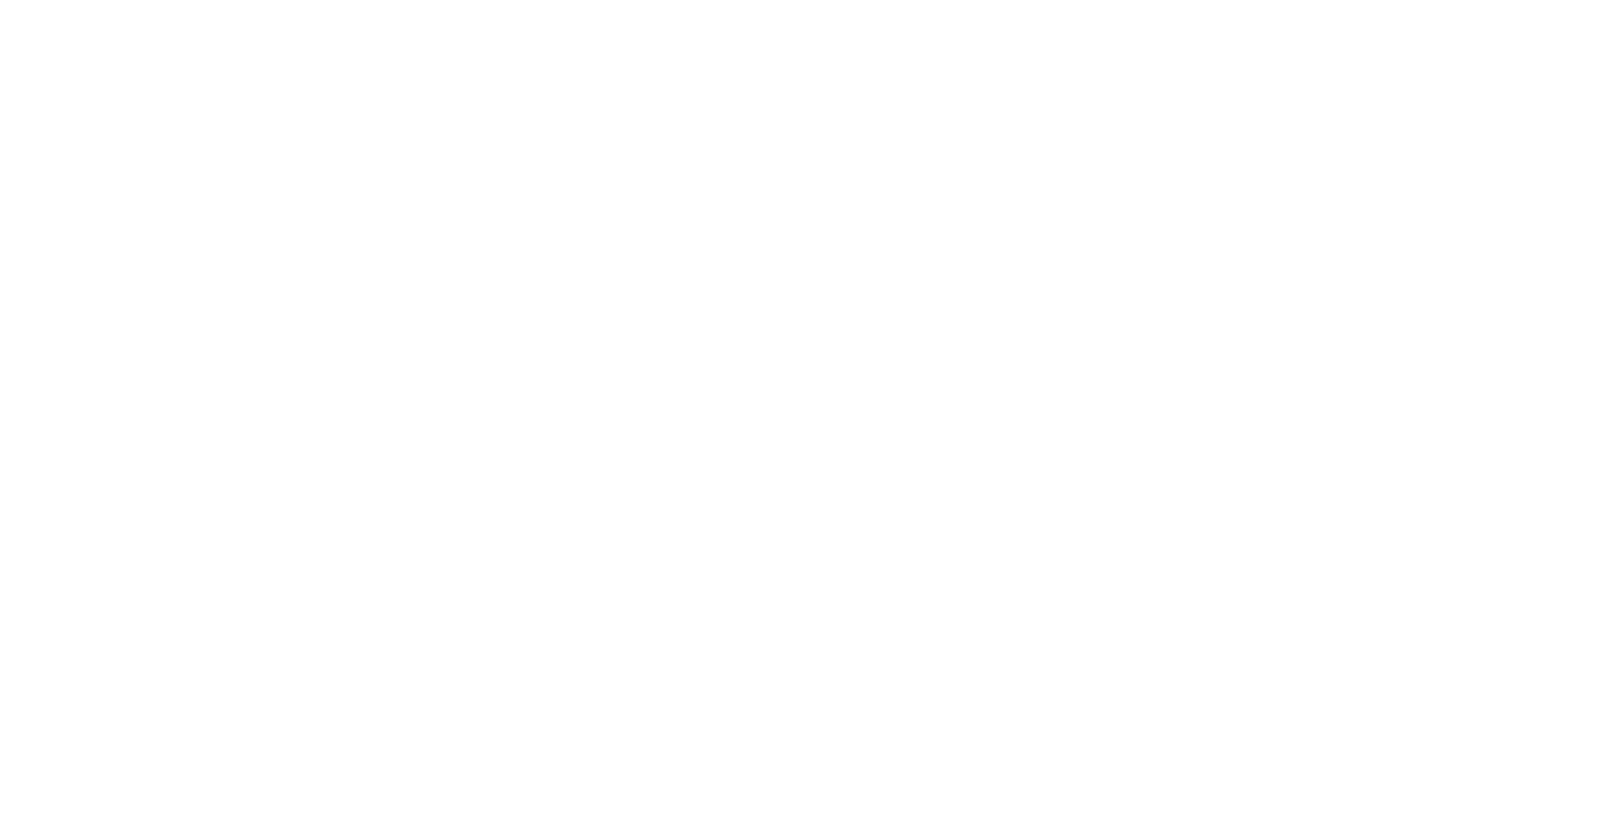 We are the POST-ROE Generation